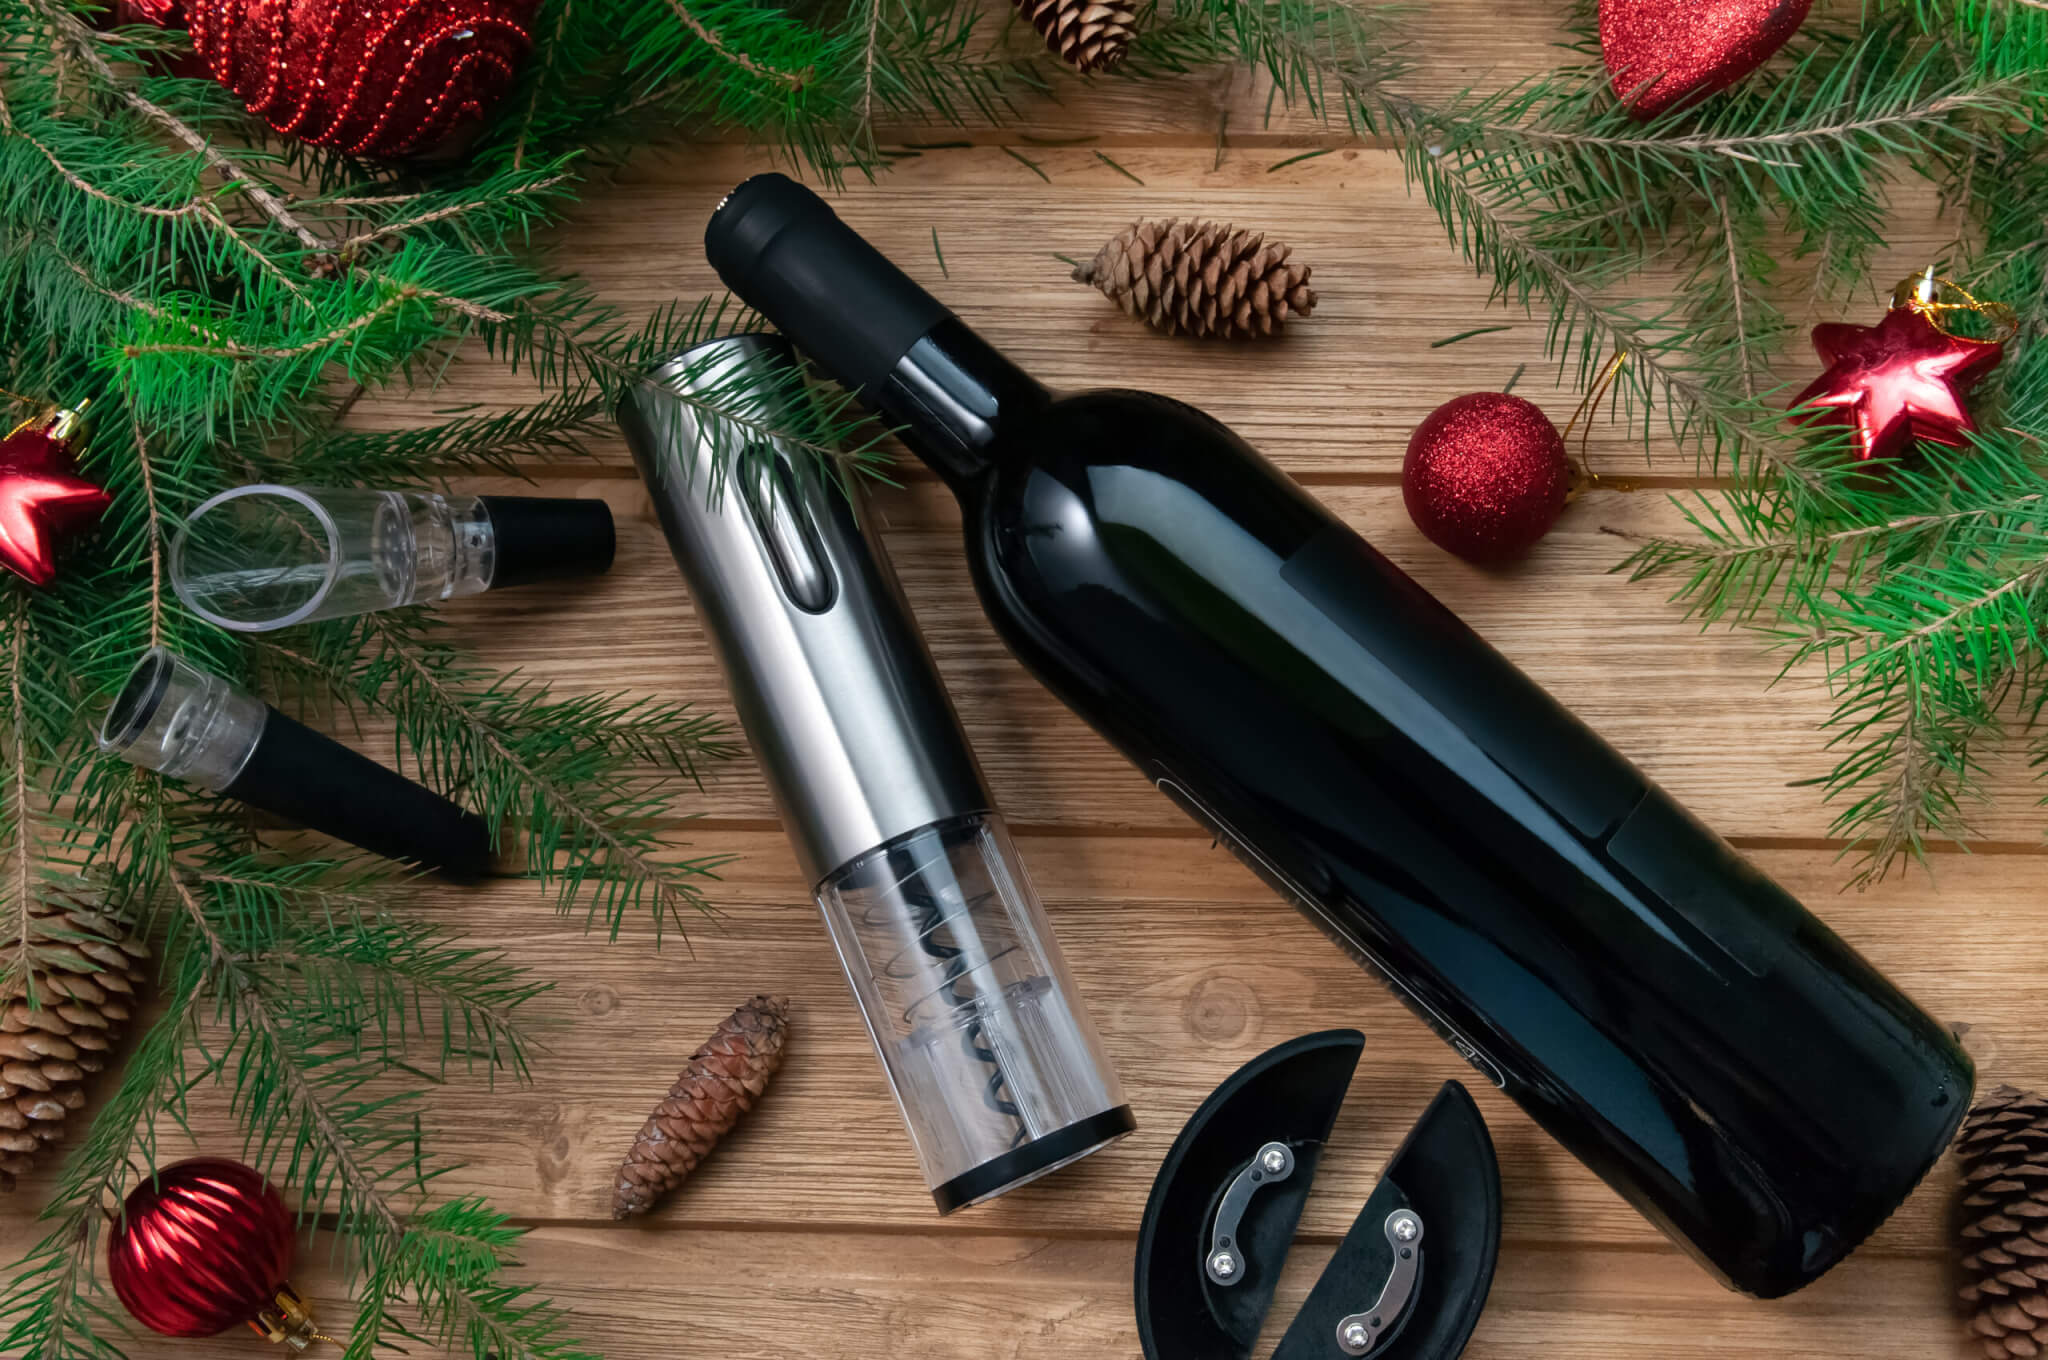 NEX Electric Wine Bottle Opener Corkscrew Automatic with Foil Cutter